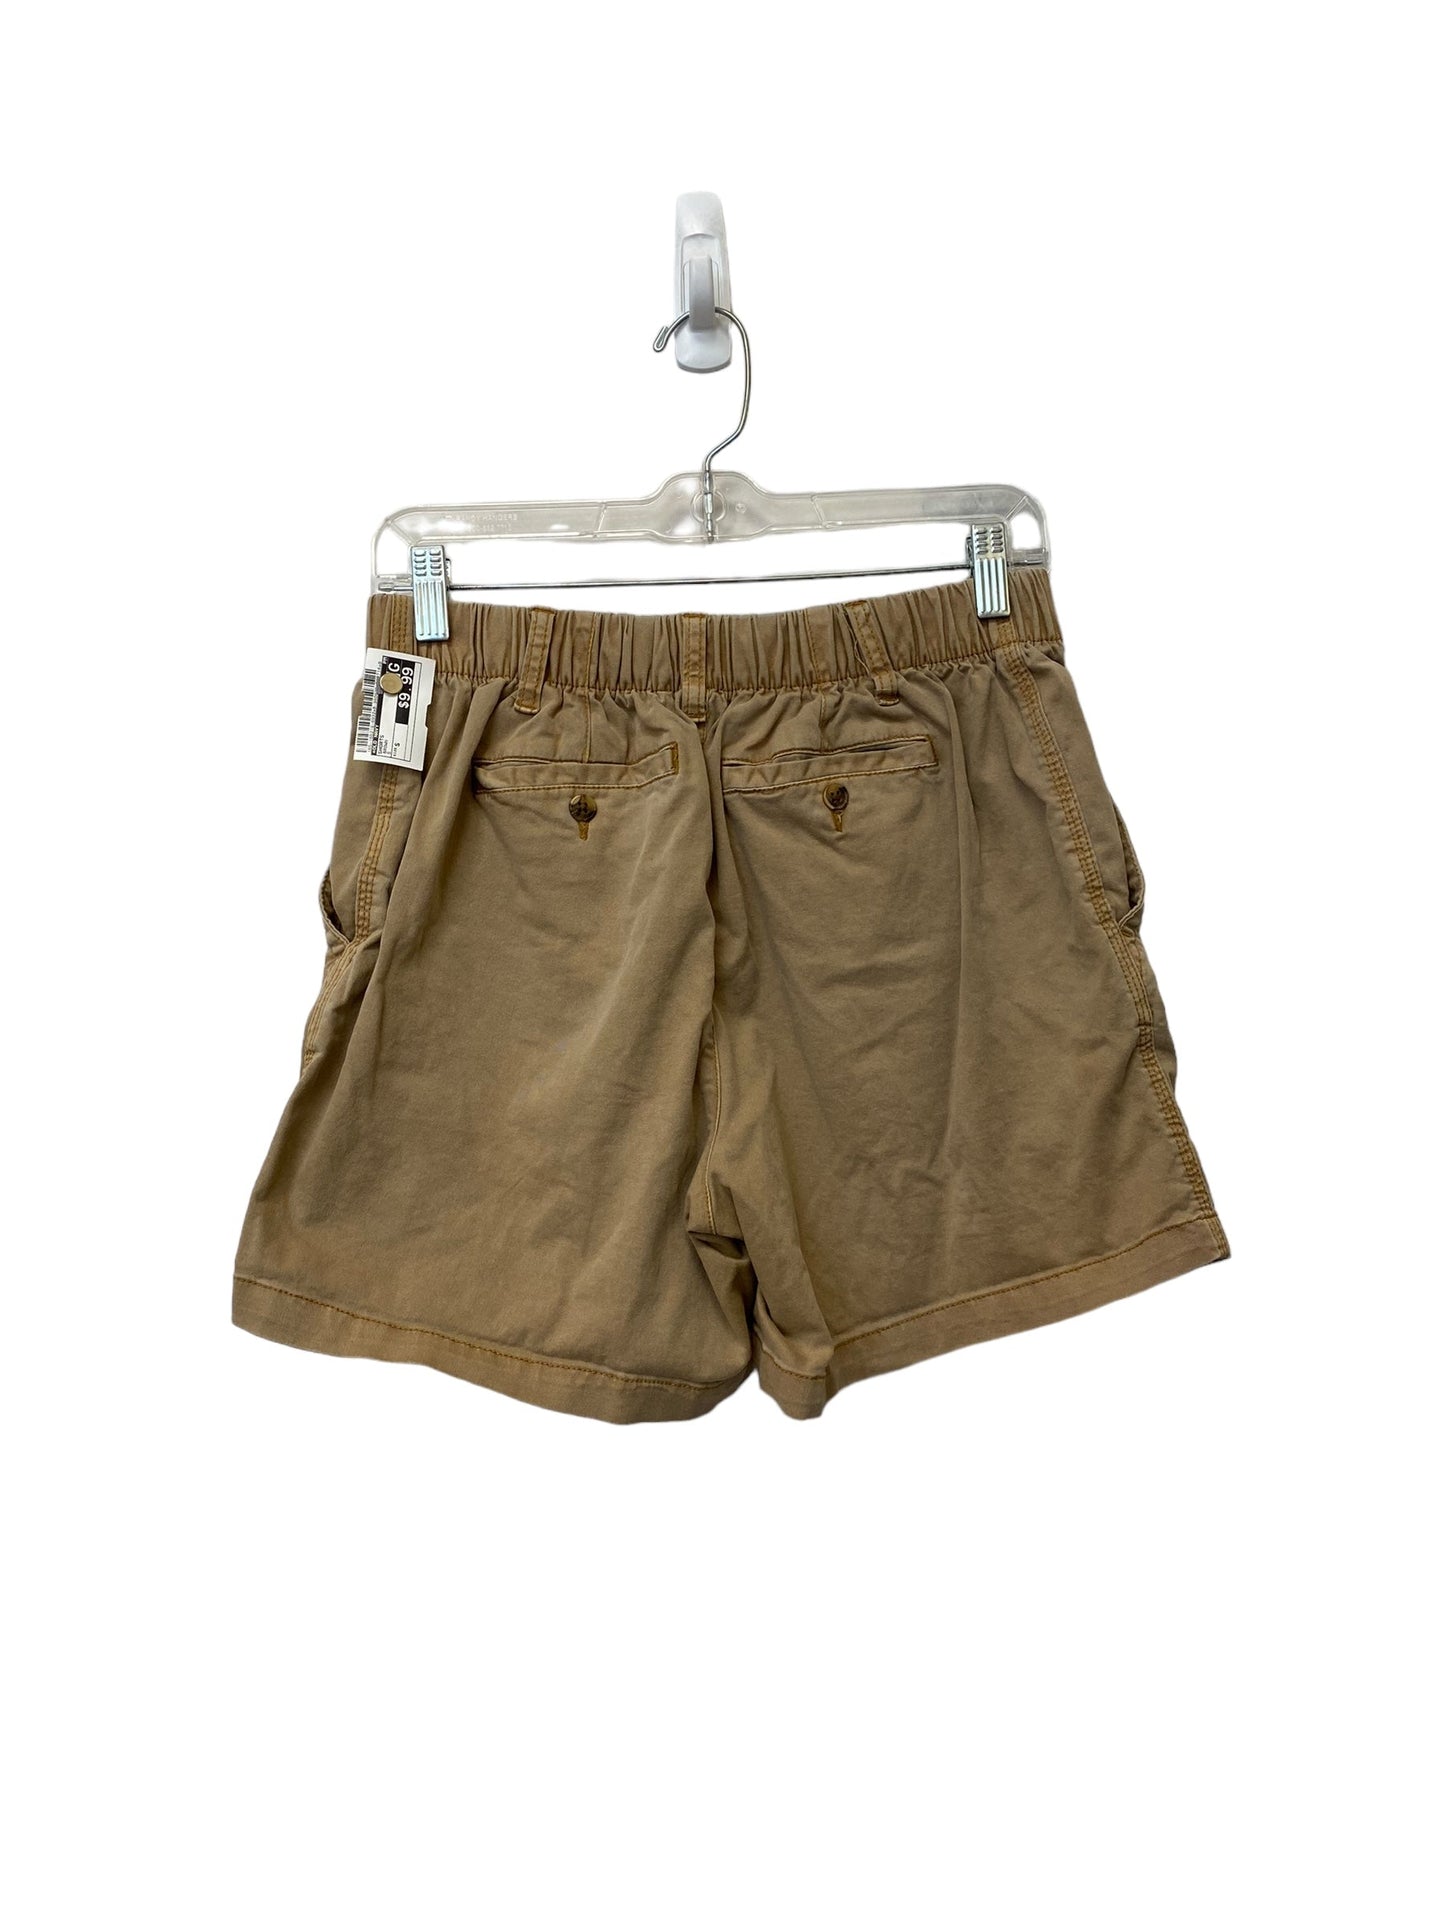 Brown Shorts Old Navy, Size S